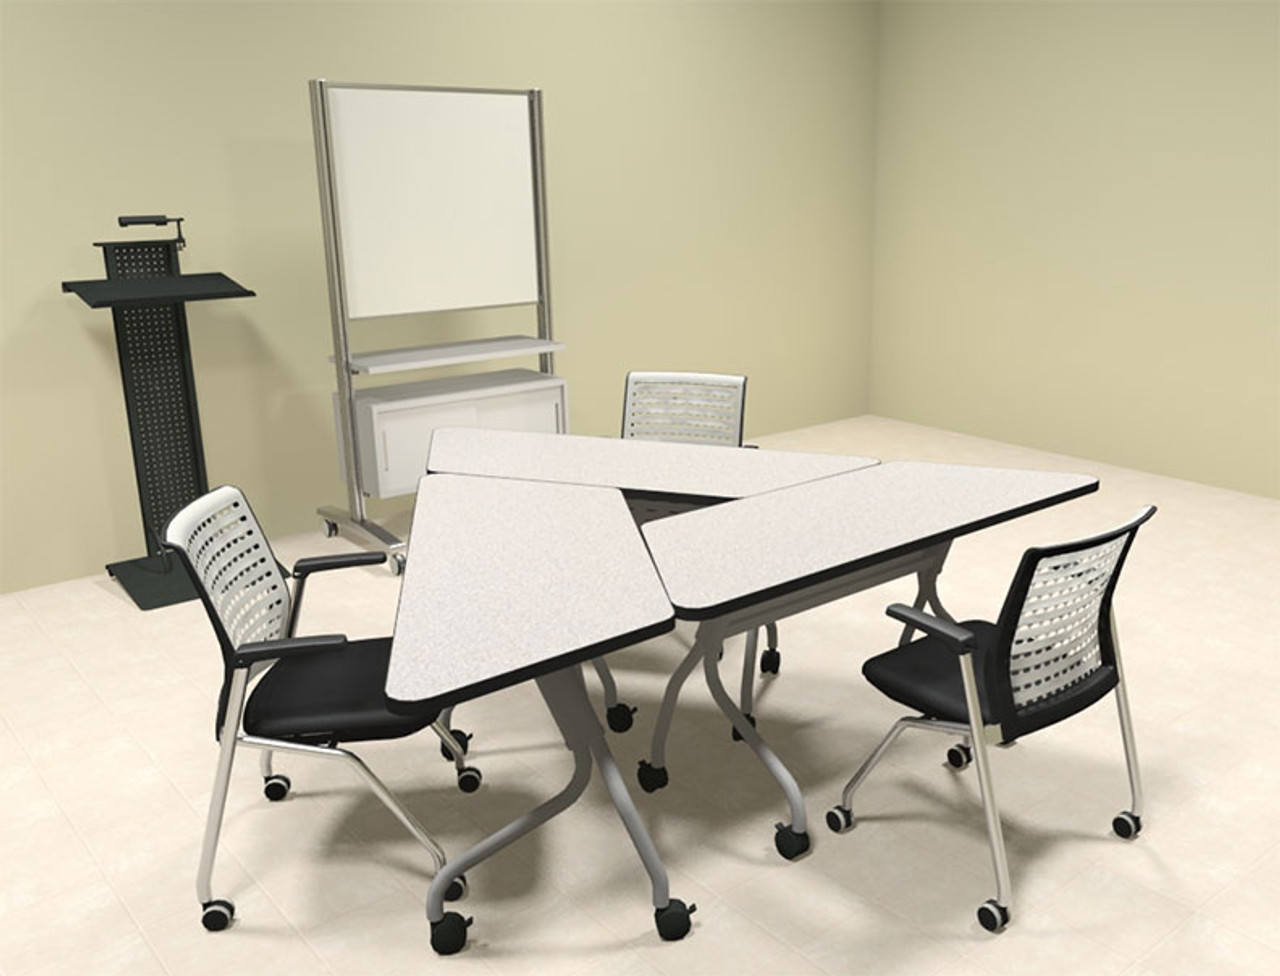 3pcs Triangle Shape Training / Conference Table Set, #MT-SYN-LT8